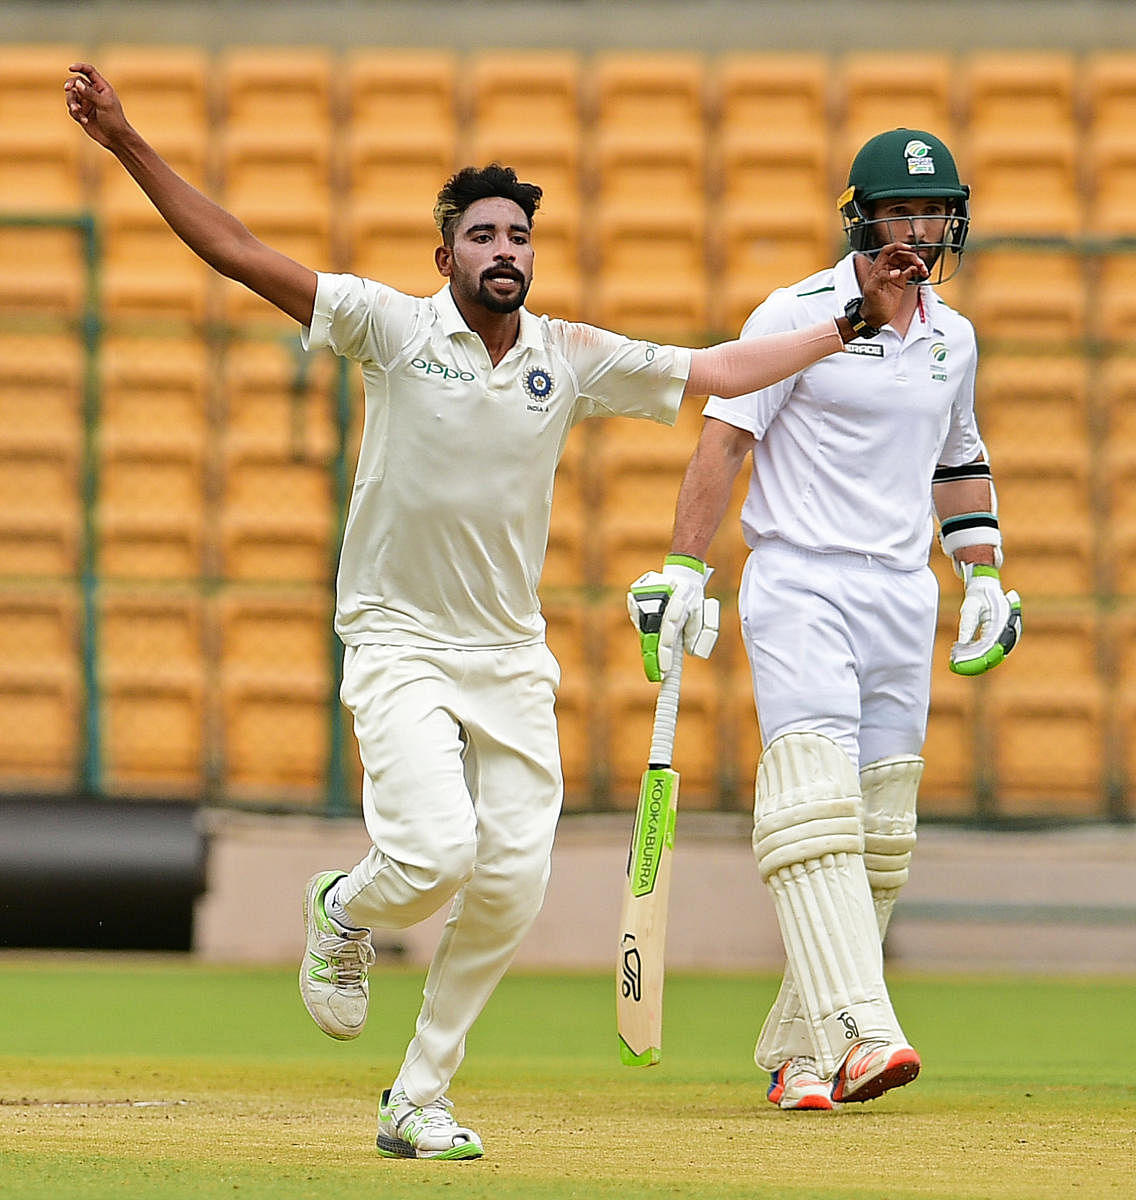 ON SONG Mohammad Siraj celebrates after sending back a South African batsman on the third day of their four-day game in Bengaluru on Monday. DH photo/ Ranju P